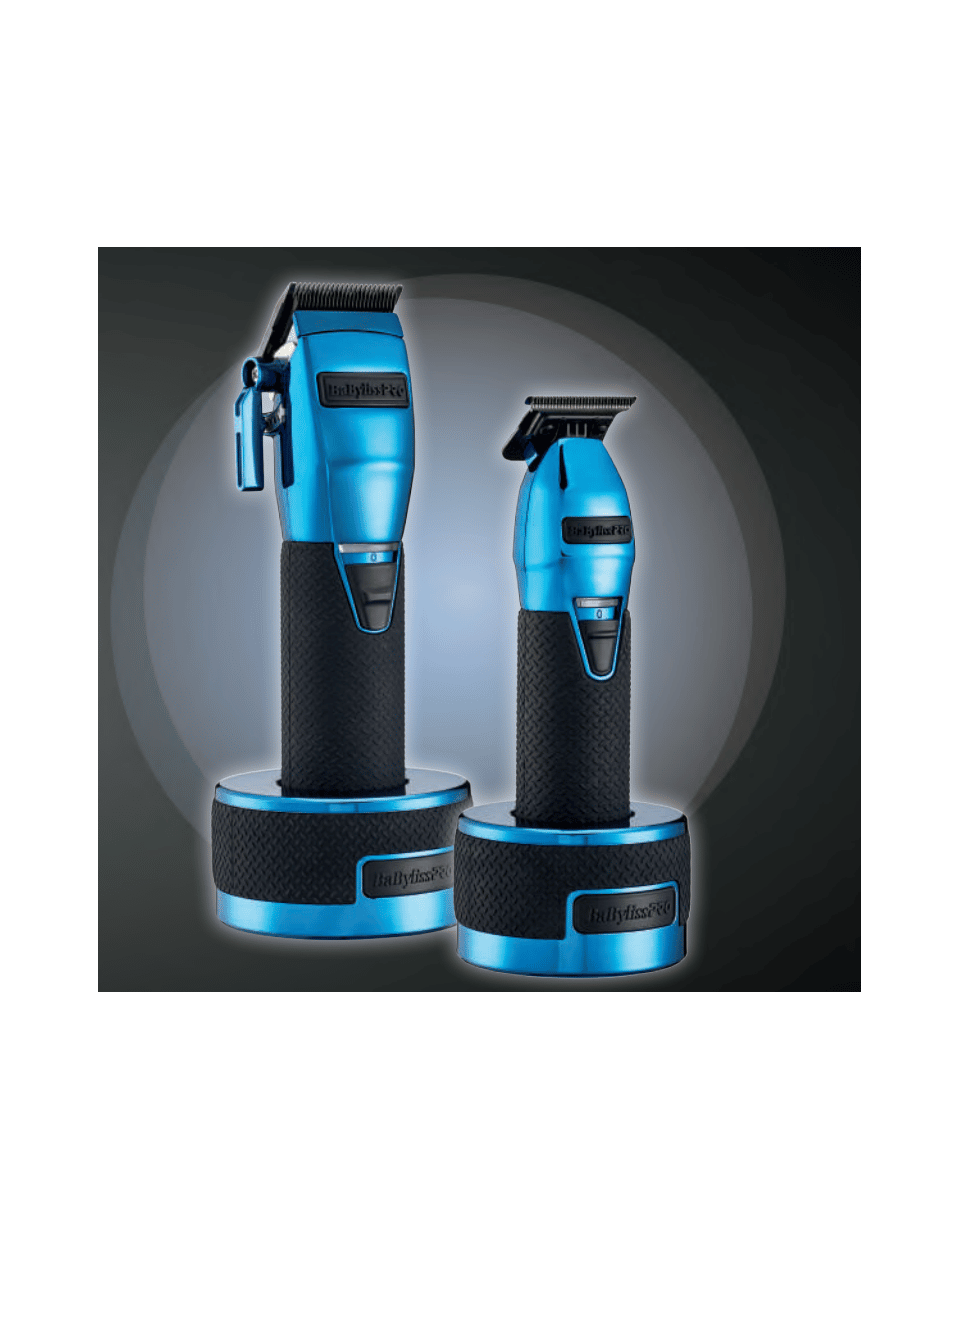 BaByliss Pro LimitedFX Boost+ Collection Clipper, Trimmer &